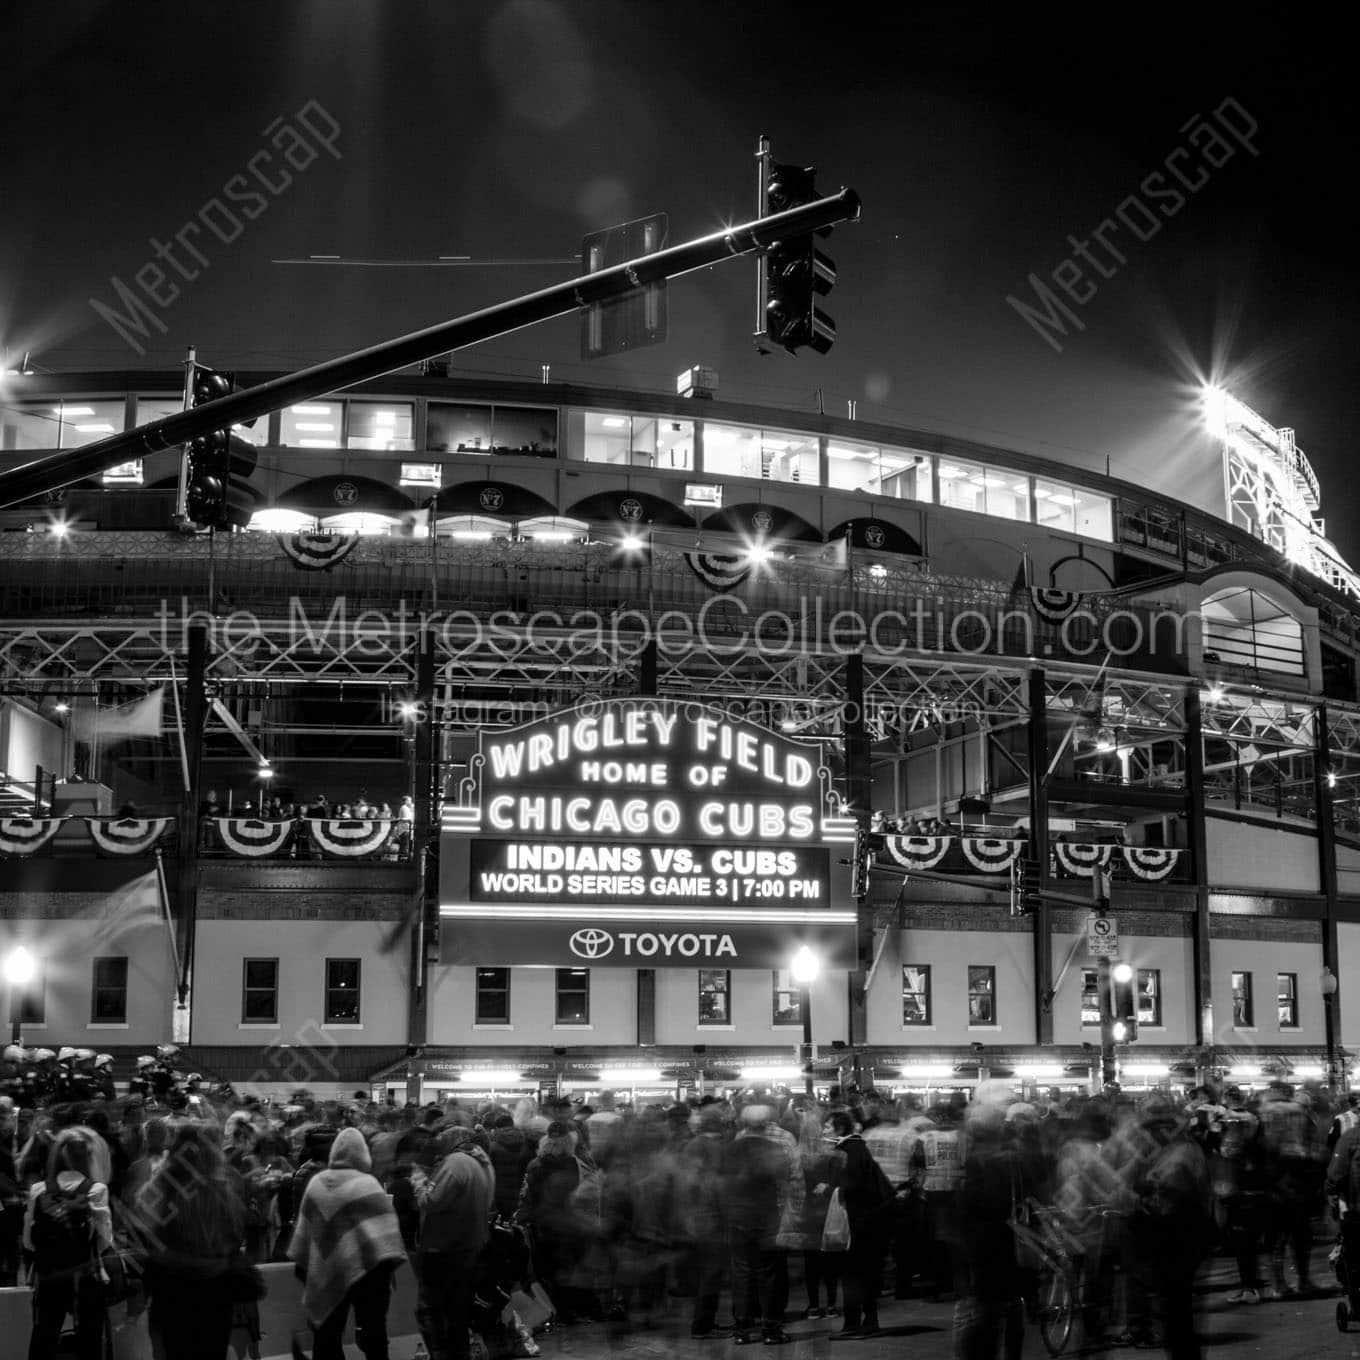 first world series game at wrigley field in 71 years Black & White Wall Art